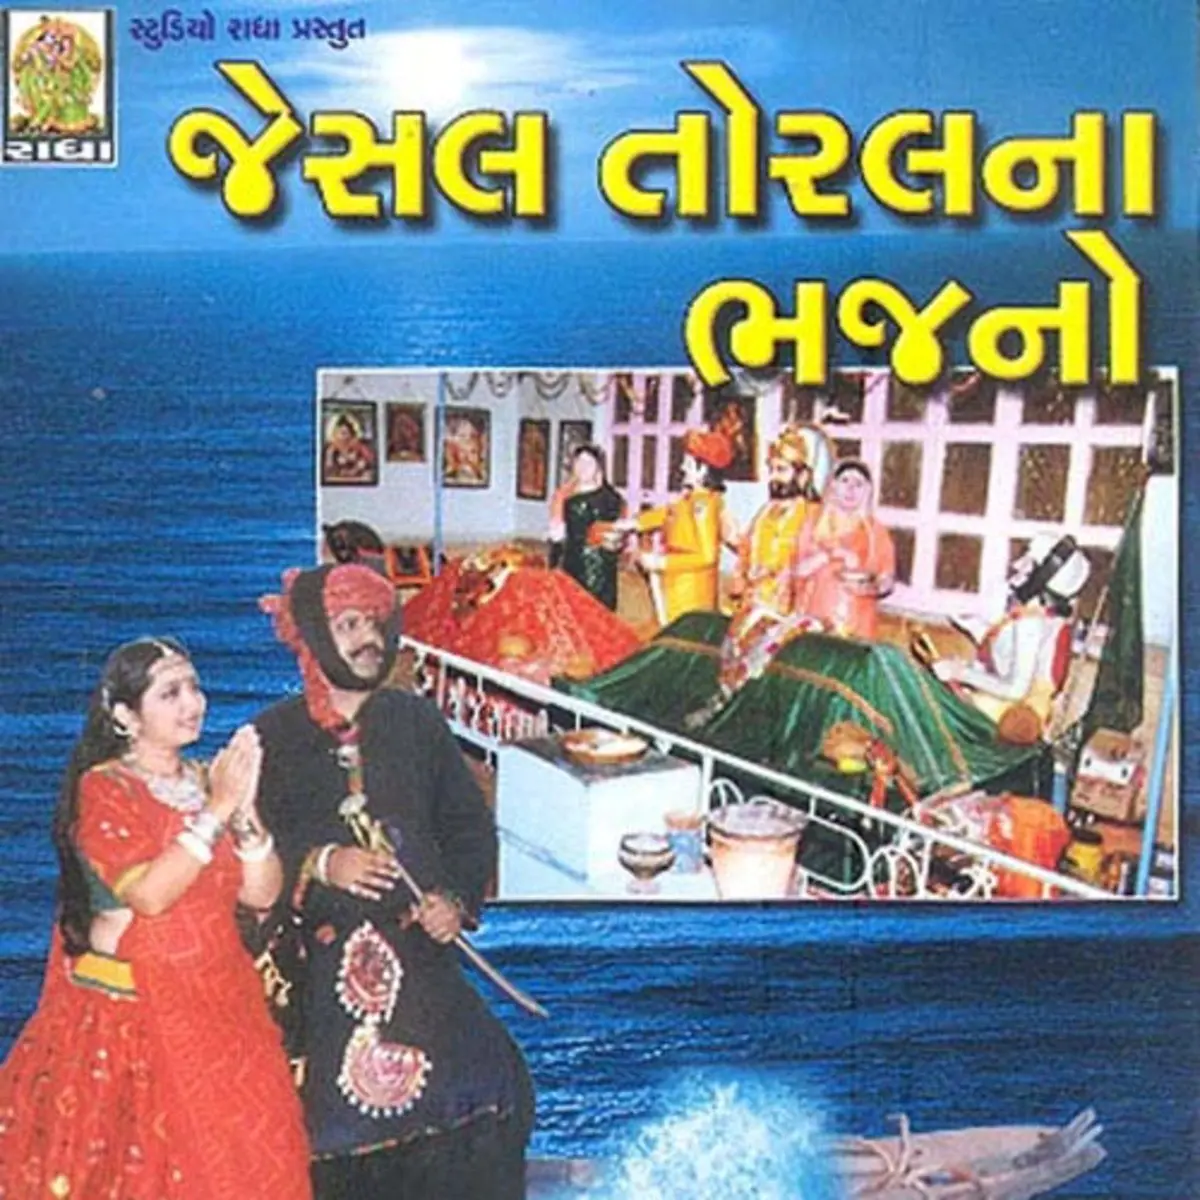 Jesal Toral Na Bhajan Songs Download Jesal Toral Na Bhajan Mp3 Songs Online Free On Gaana Com Youtube search results will be converted first, then the file can be downloaded, but the. jesal toral na bhajan mp3 songs